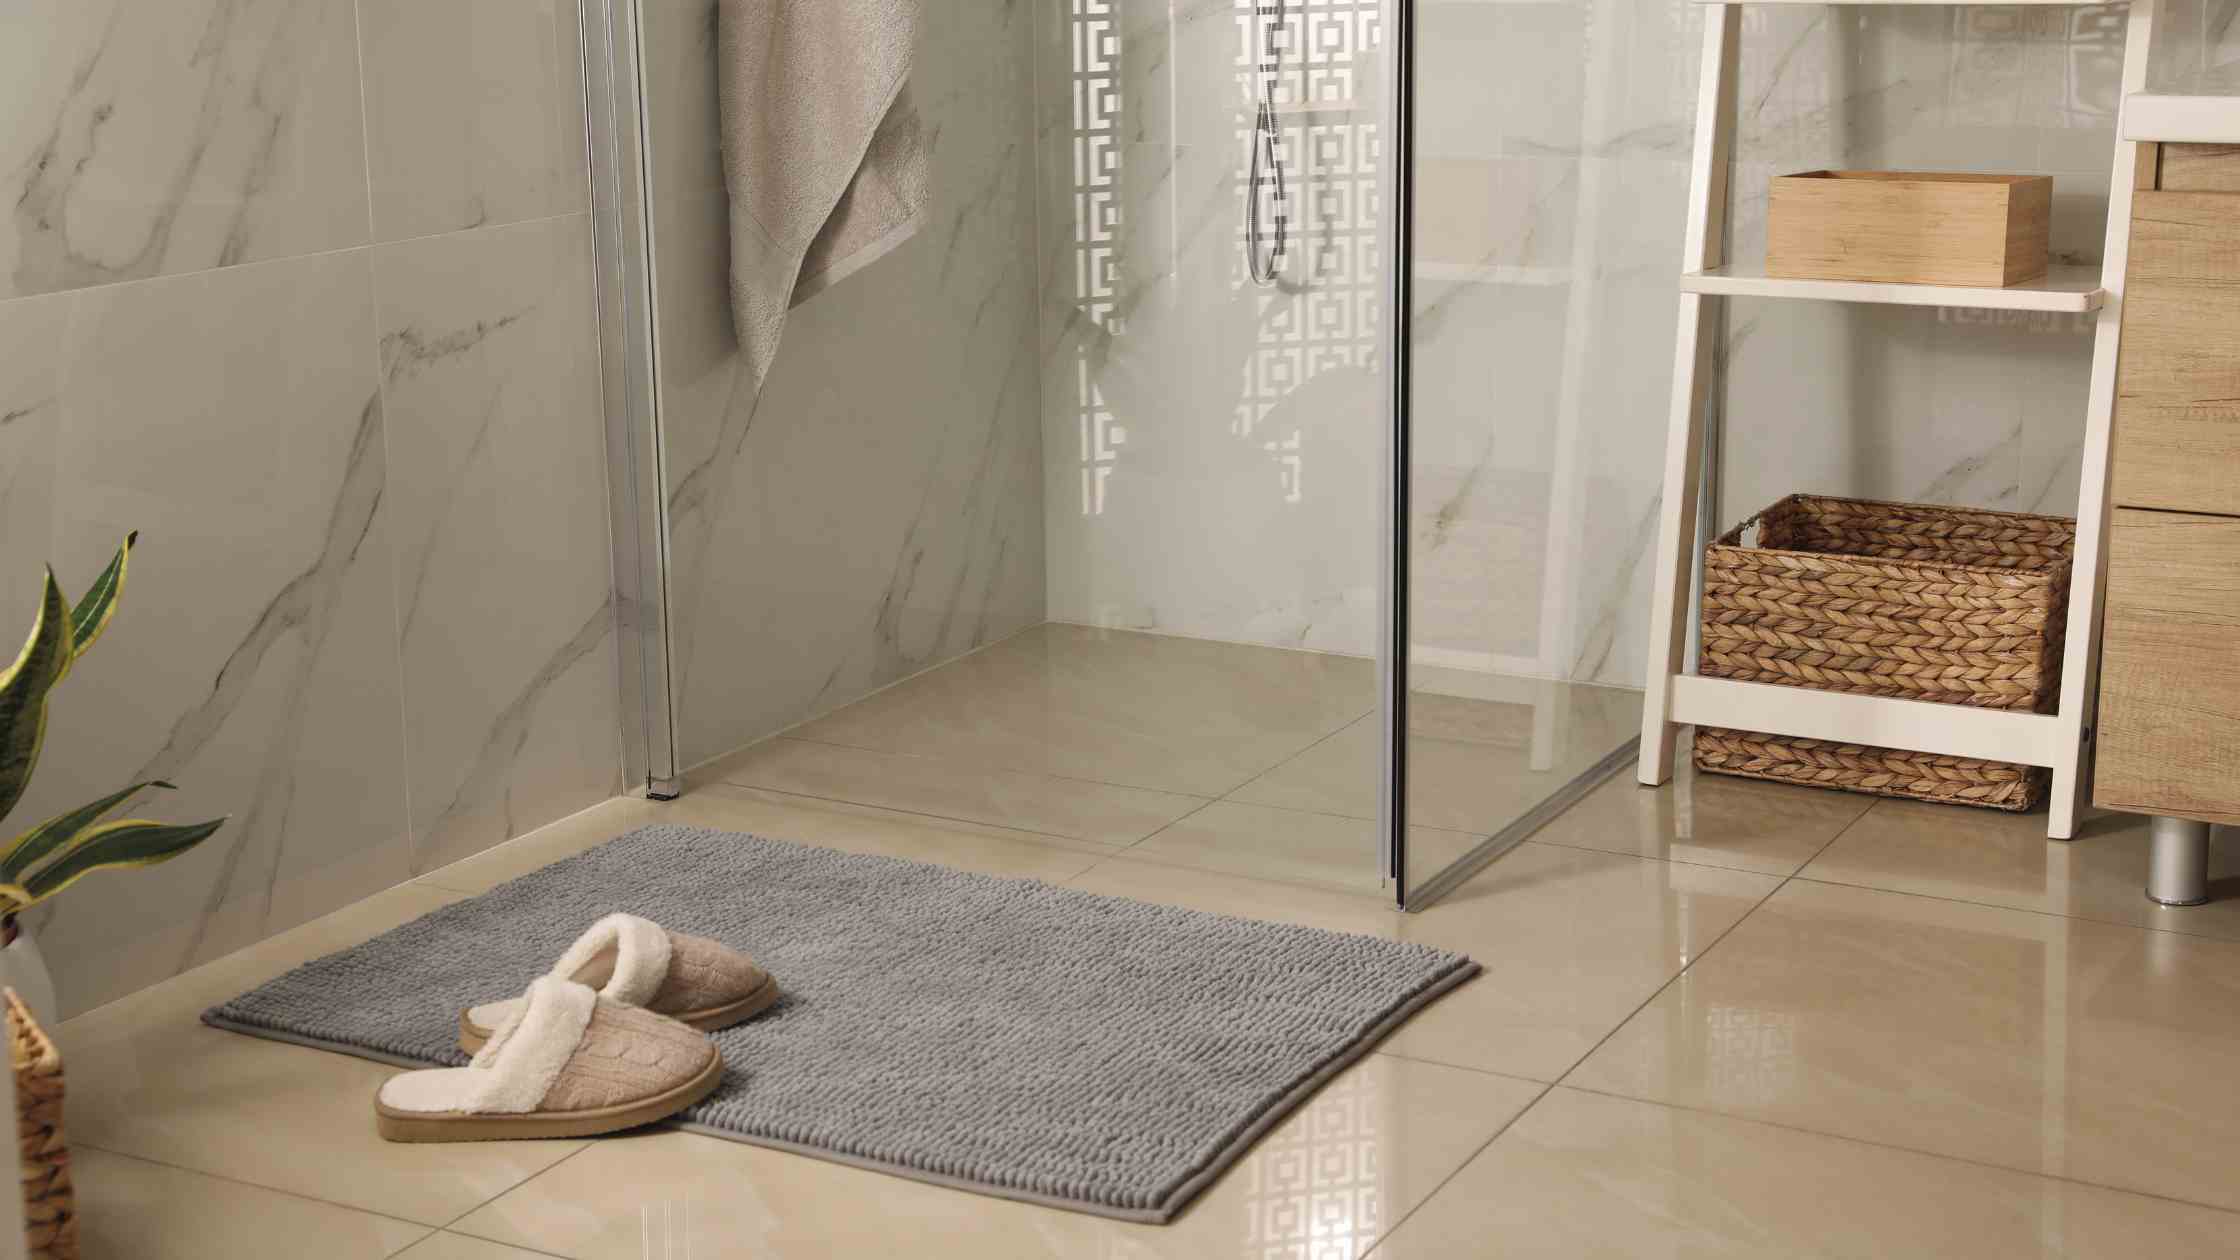 4 Simple Process To Clean Stone Bath Mats (Required Tools, Guide, Buying Recommendation!)